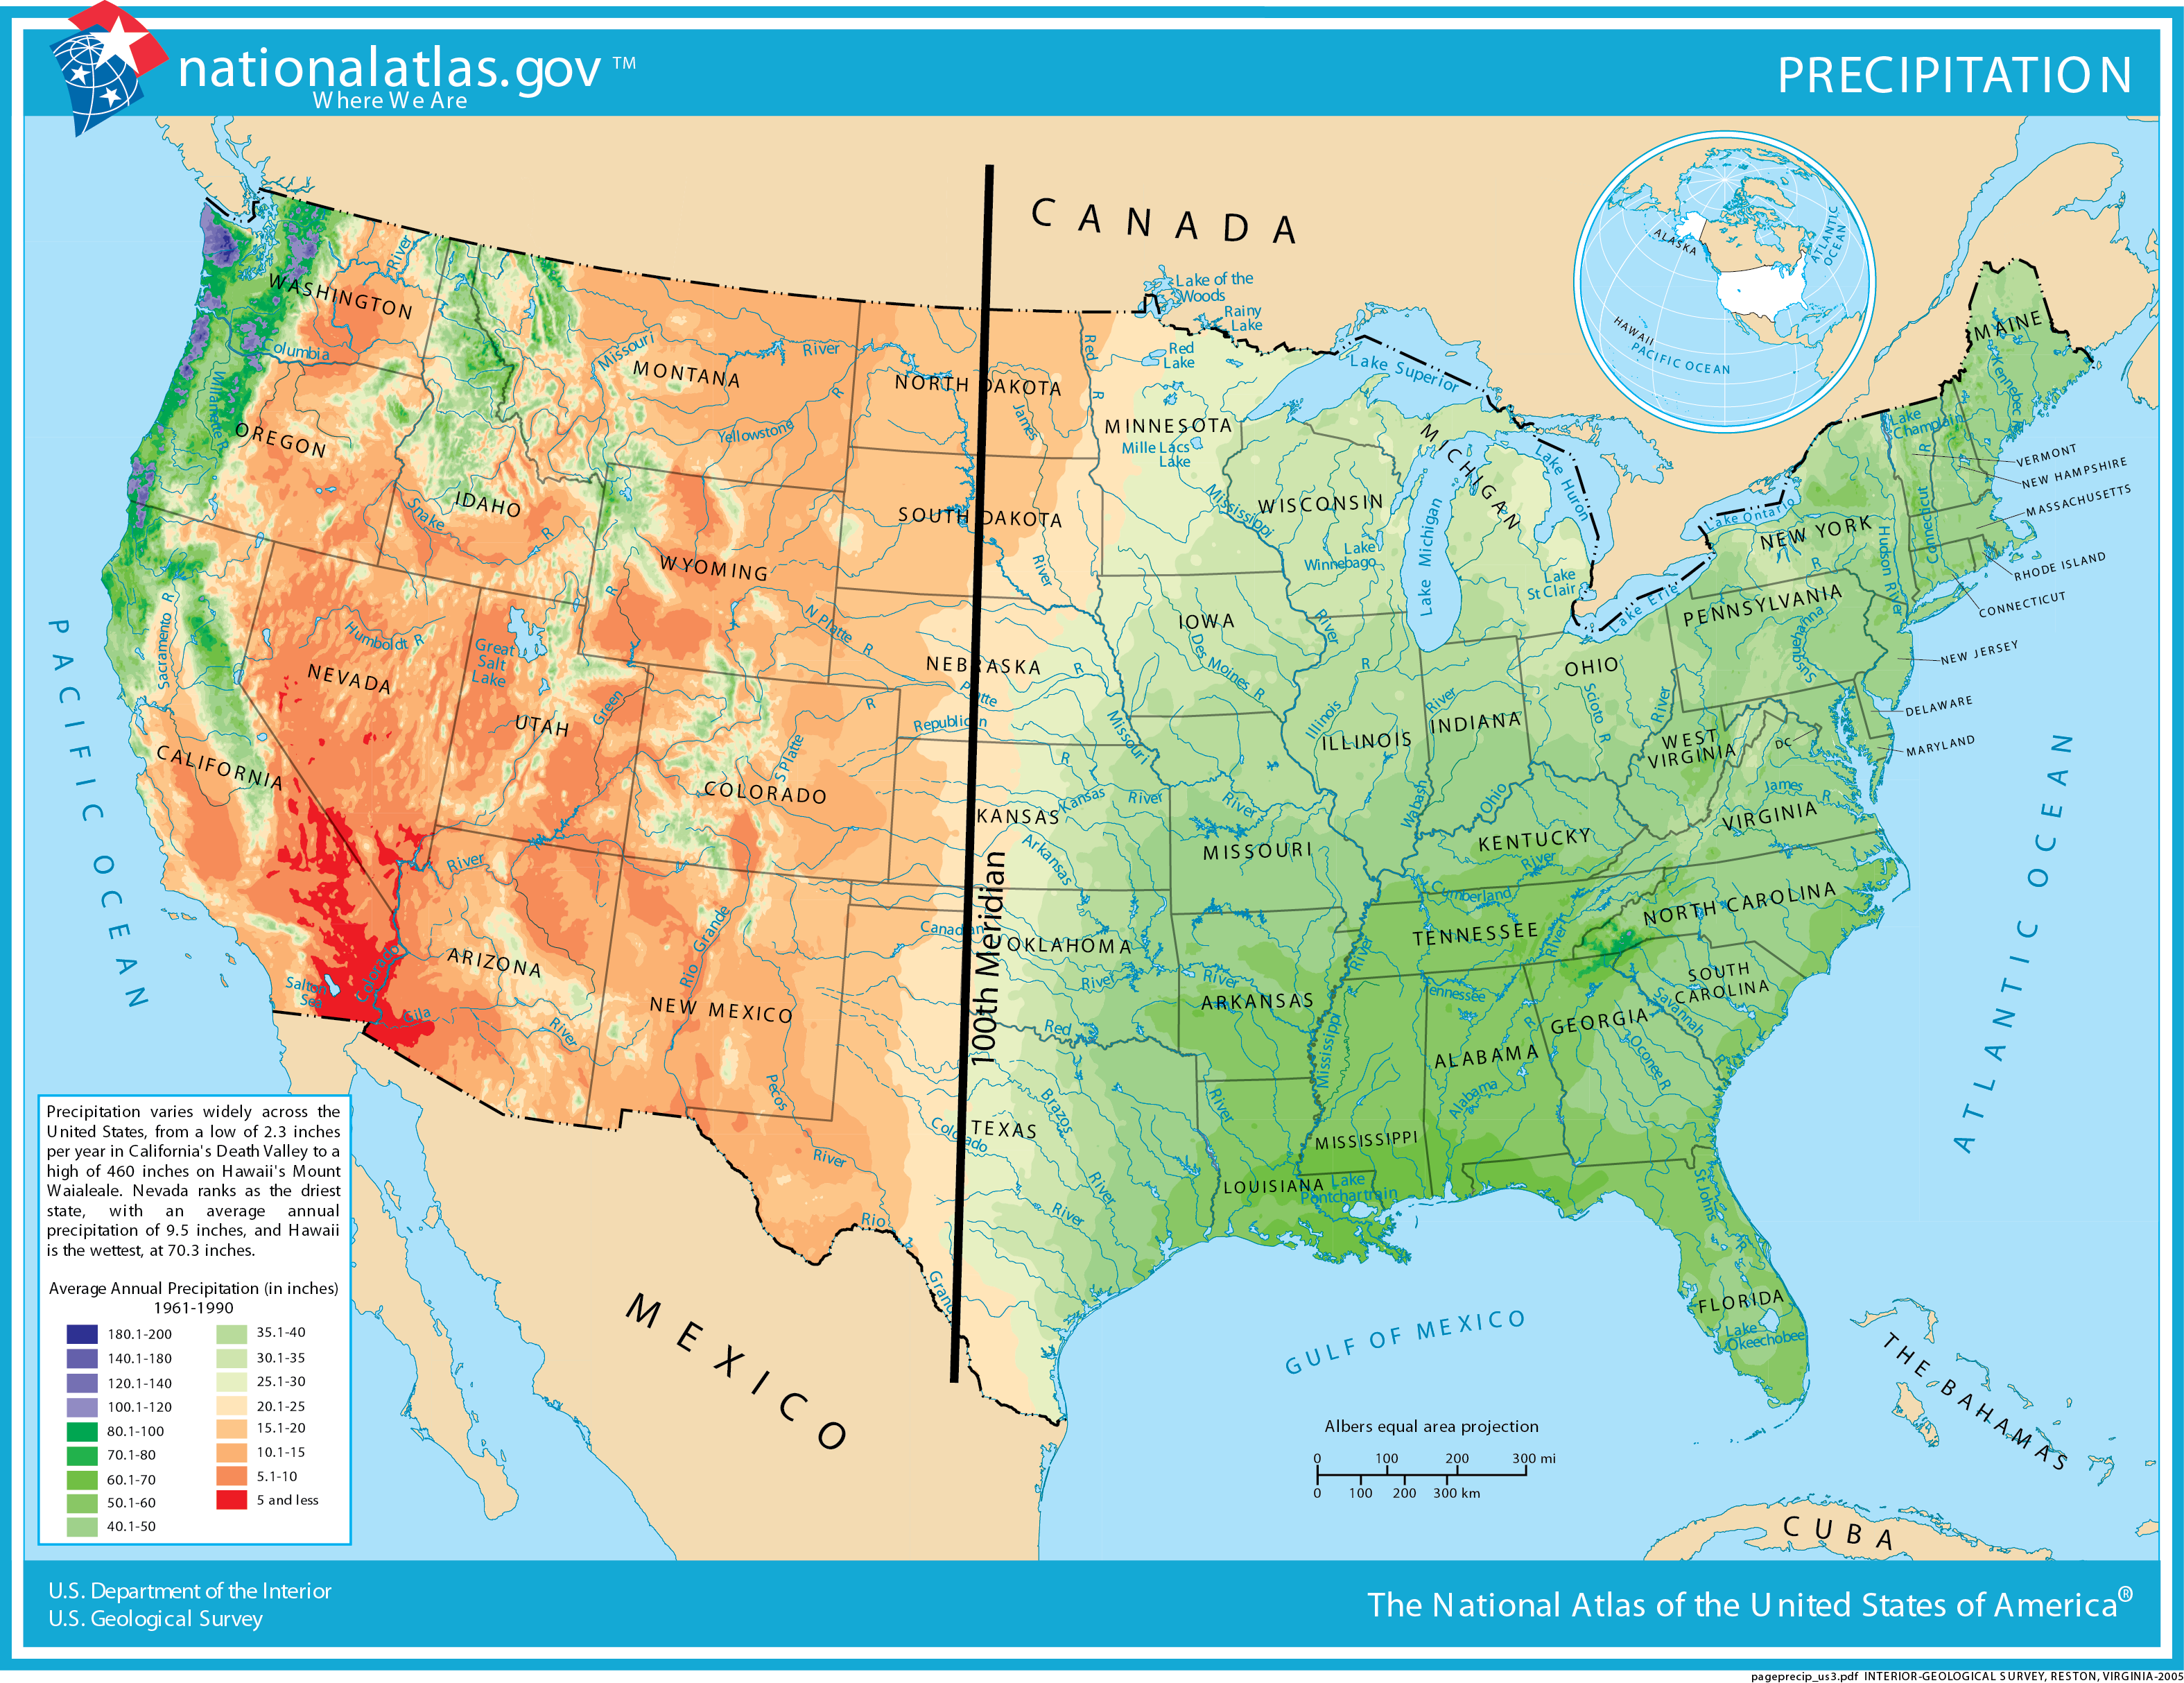 This map of the United States shows the distribution of precipitation across the country, with drier regions in the West and more humid regions in the East. The 100th Meridian runs from North Dakota through Texas, marking a general transition between average precipitation on either side of the country.